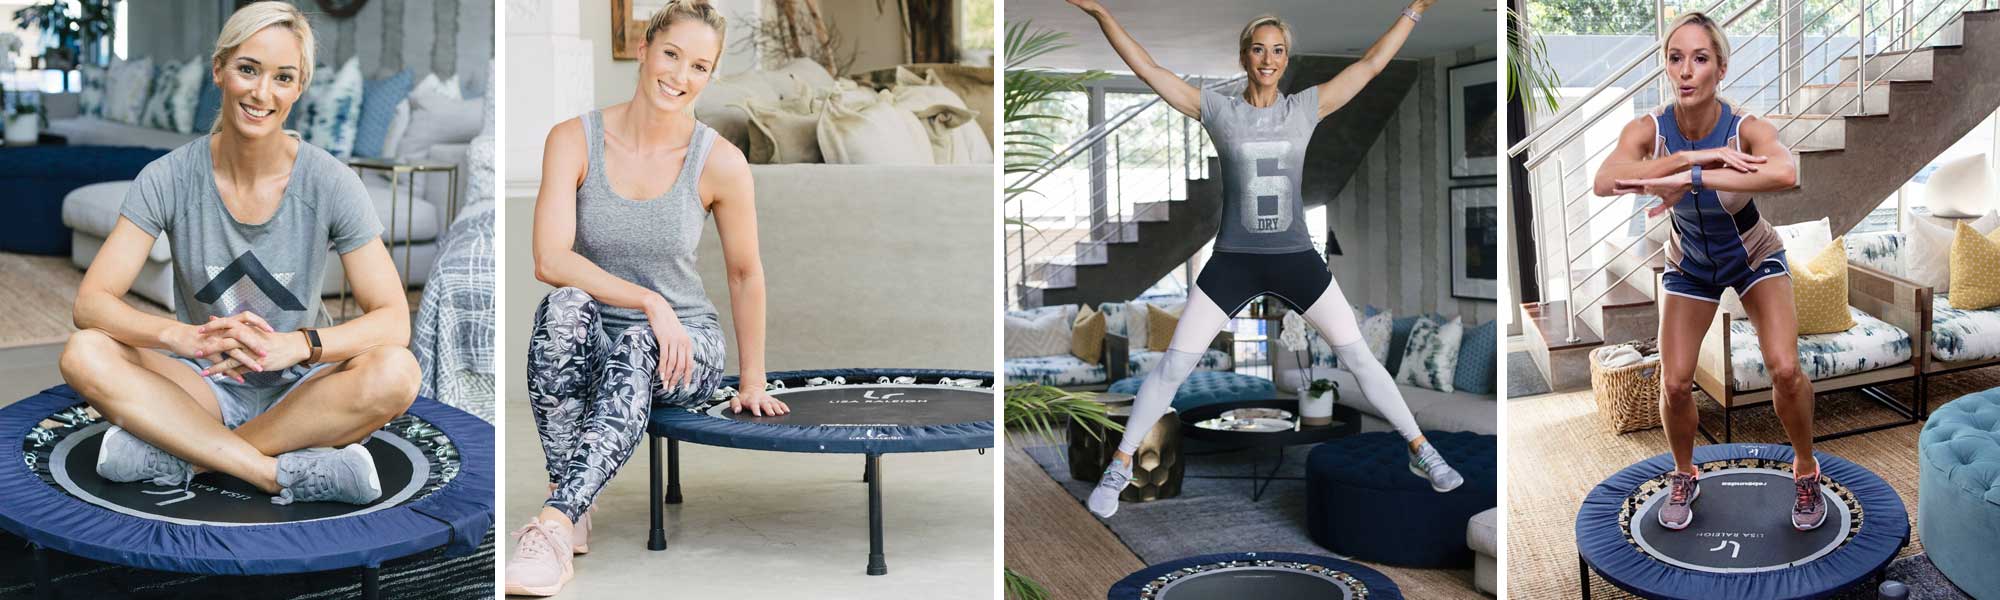 46 Benefits Of Rebounding  Discover the Ultimate Wellness Workout